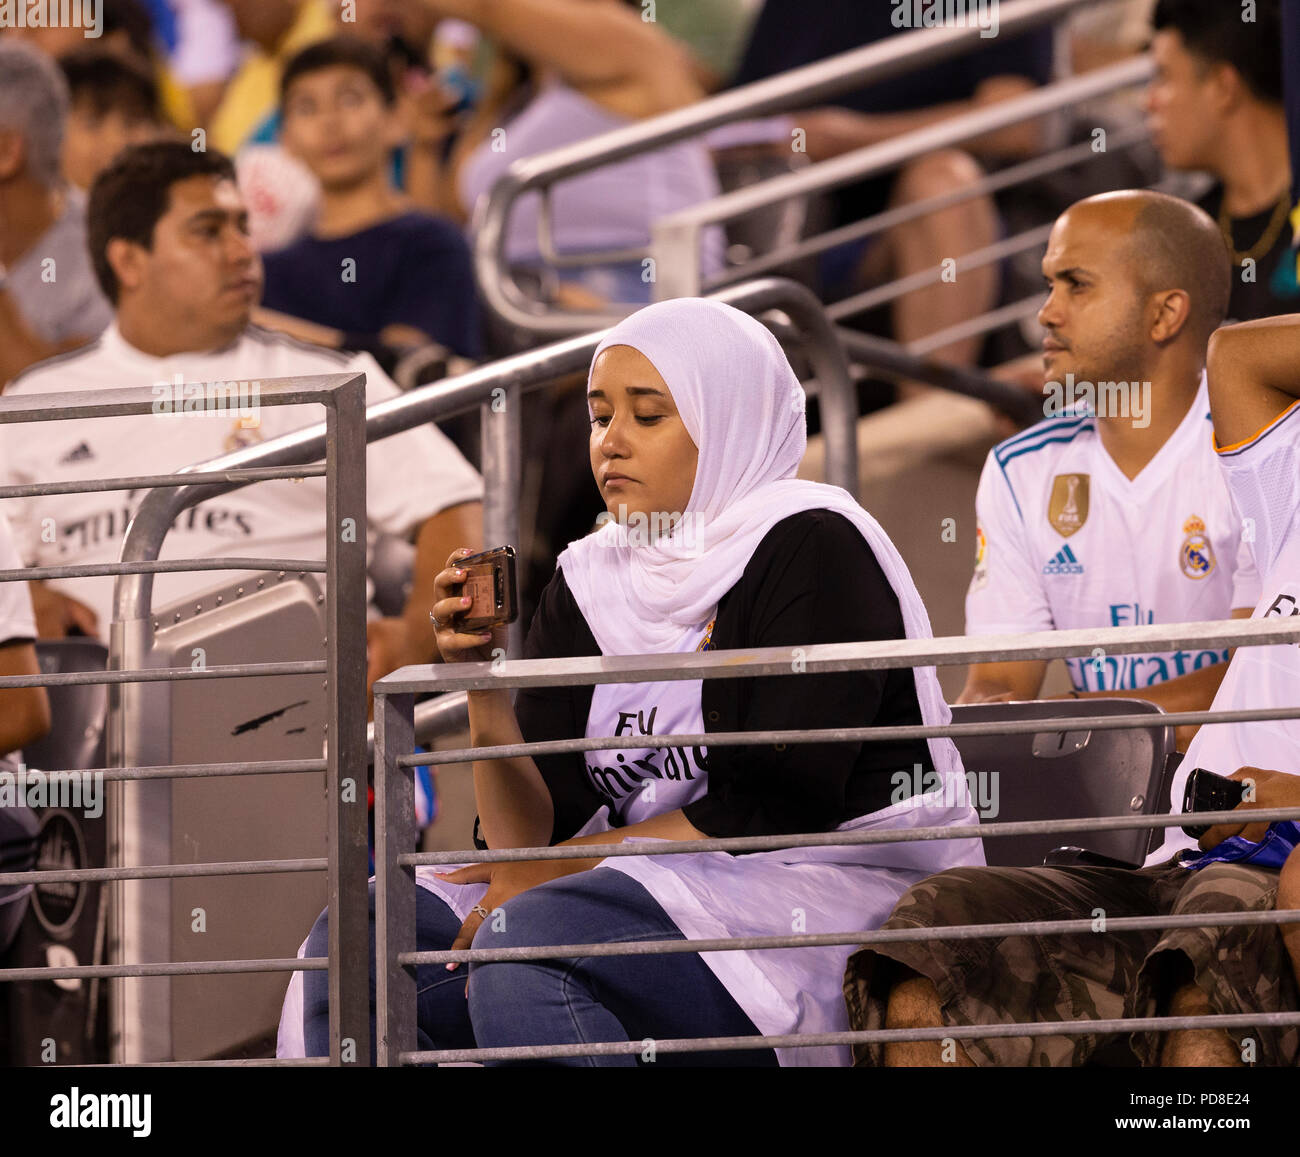 East Rutherford, NJ - August 7, 2018 Muslim woman fan of Real Madrid making video with cell phone during ICC game against AS Roma at MetLife stadium Real won 2